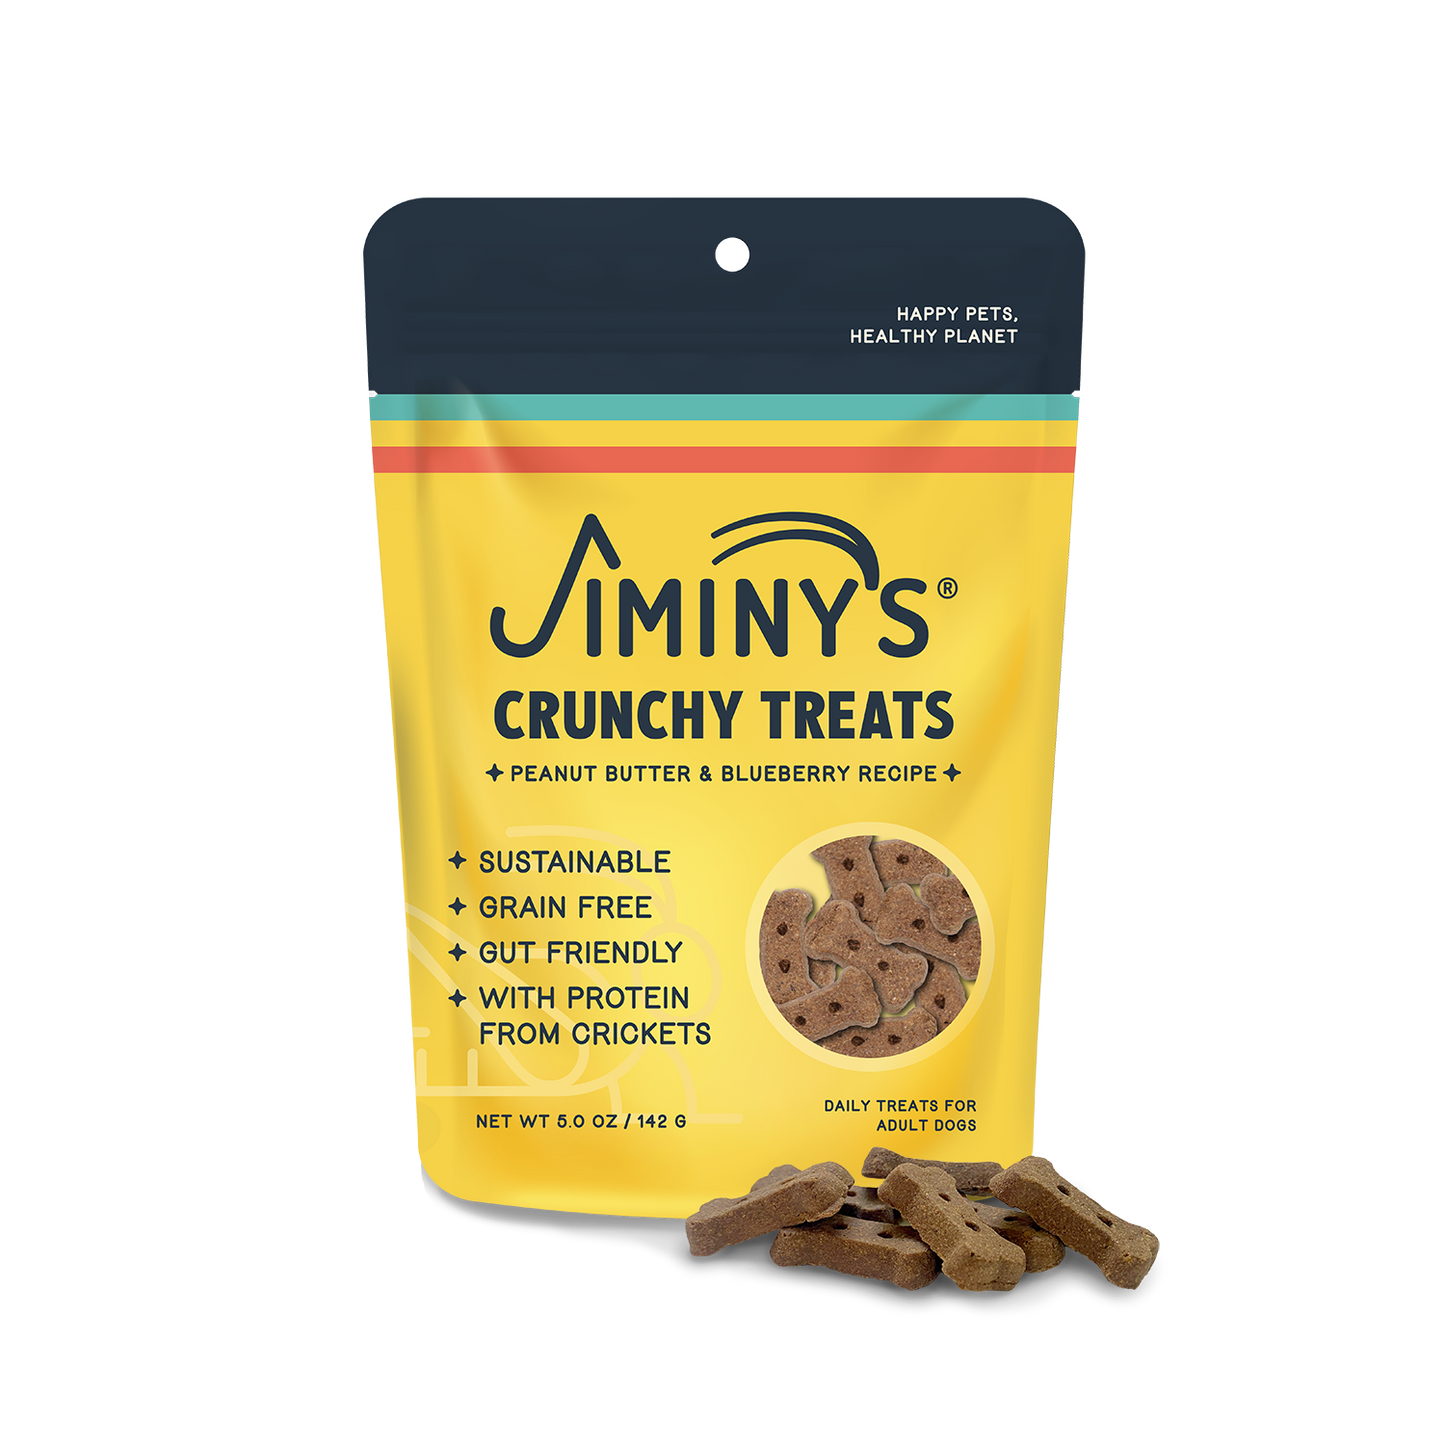 Jiminy's Peanut Butter and Blueberry Recipe Dog Treats - Soft-Baked Biscuits with Cricket Protein and Blueberries front bag